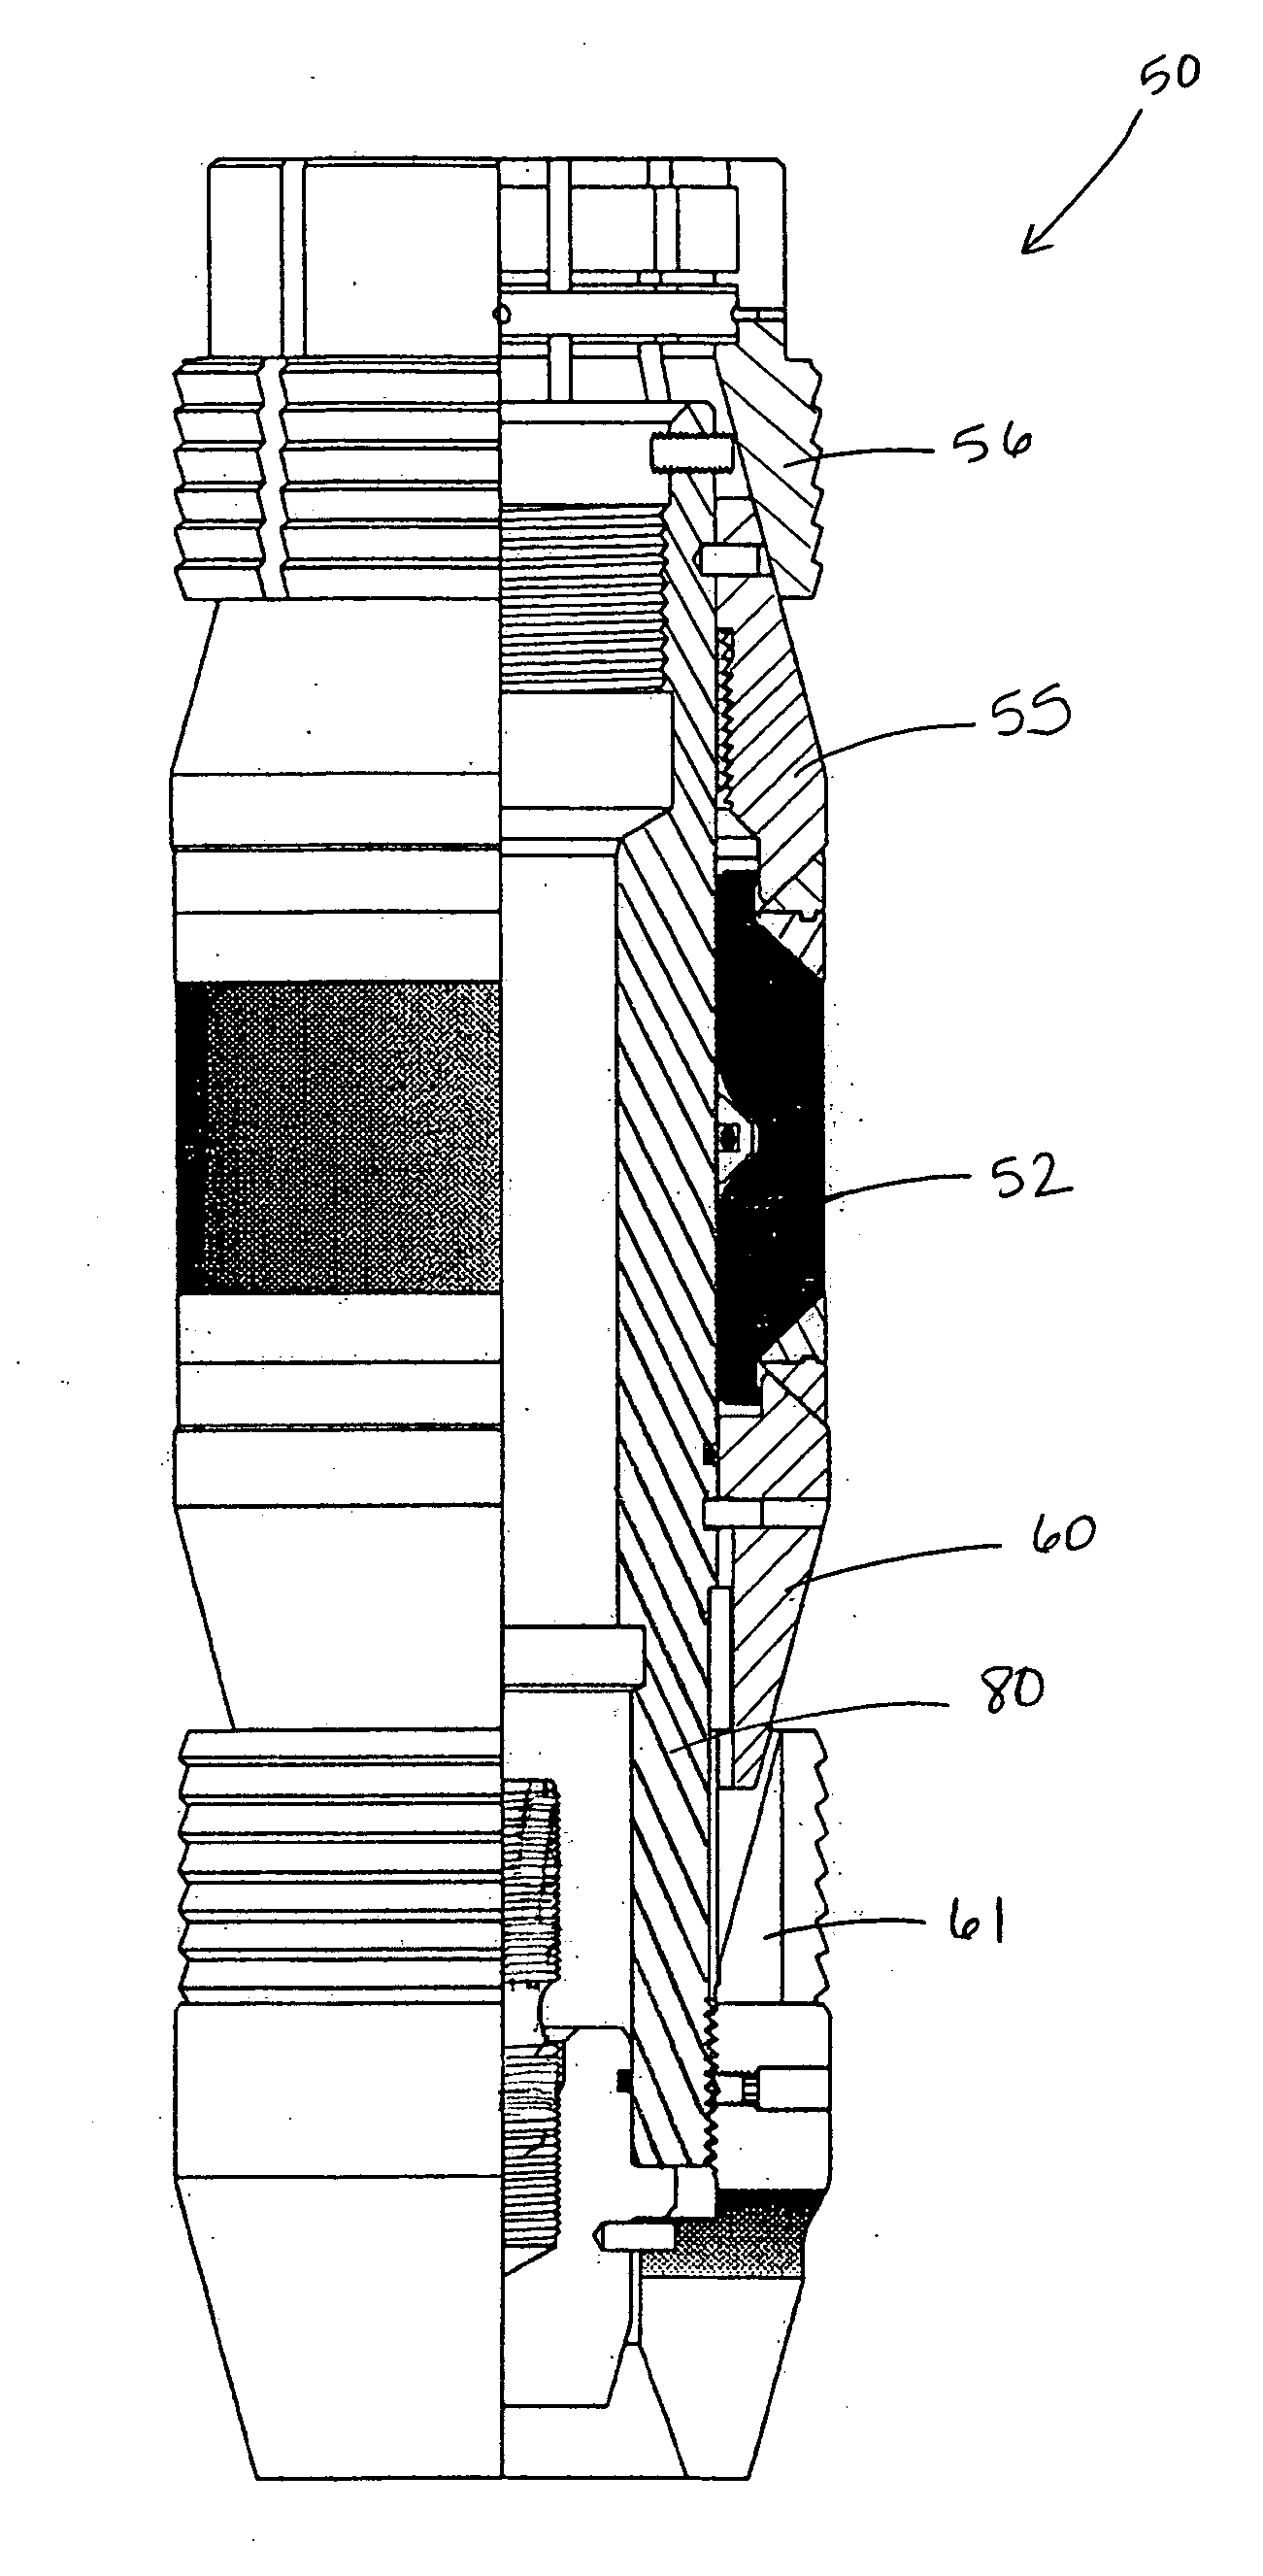 Secondary lock for a downhole tool